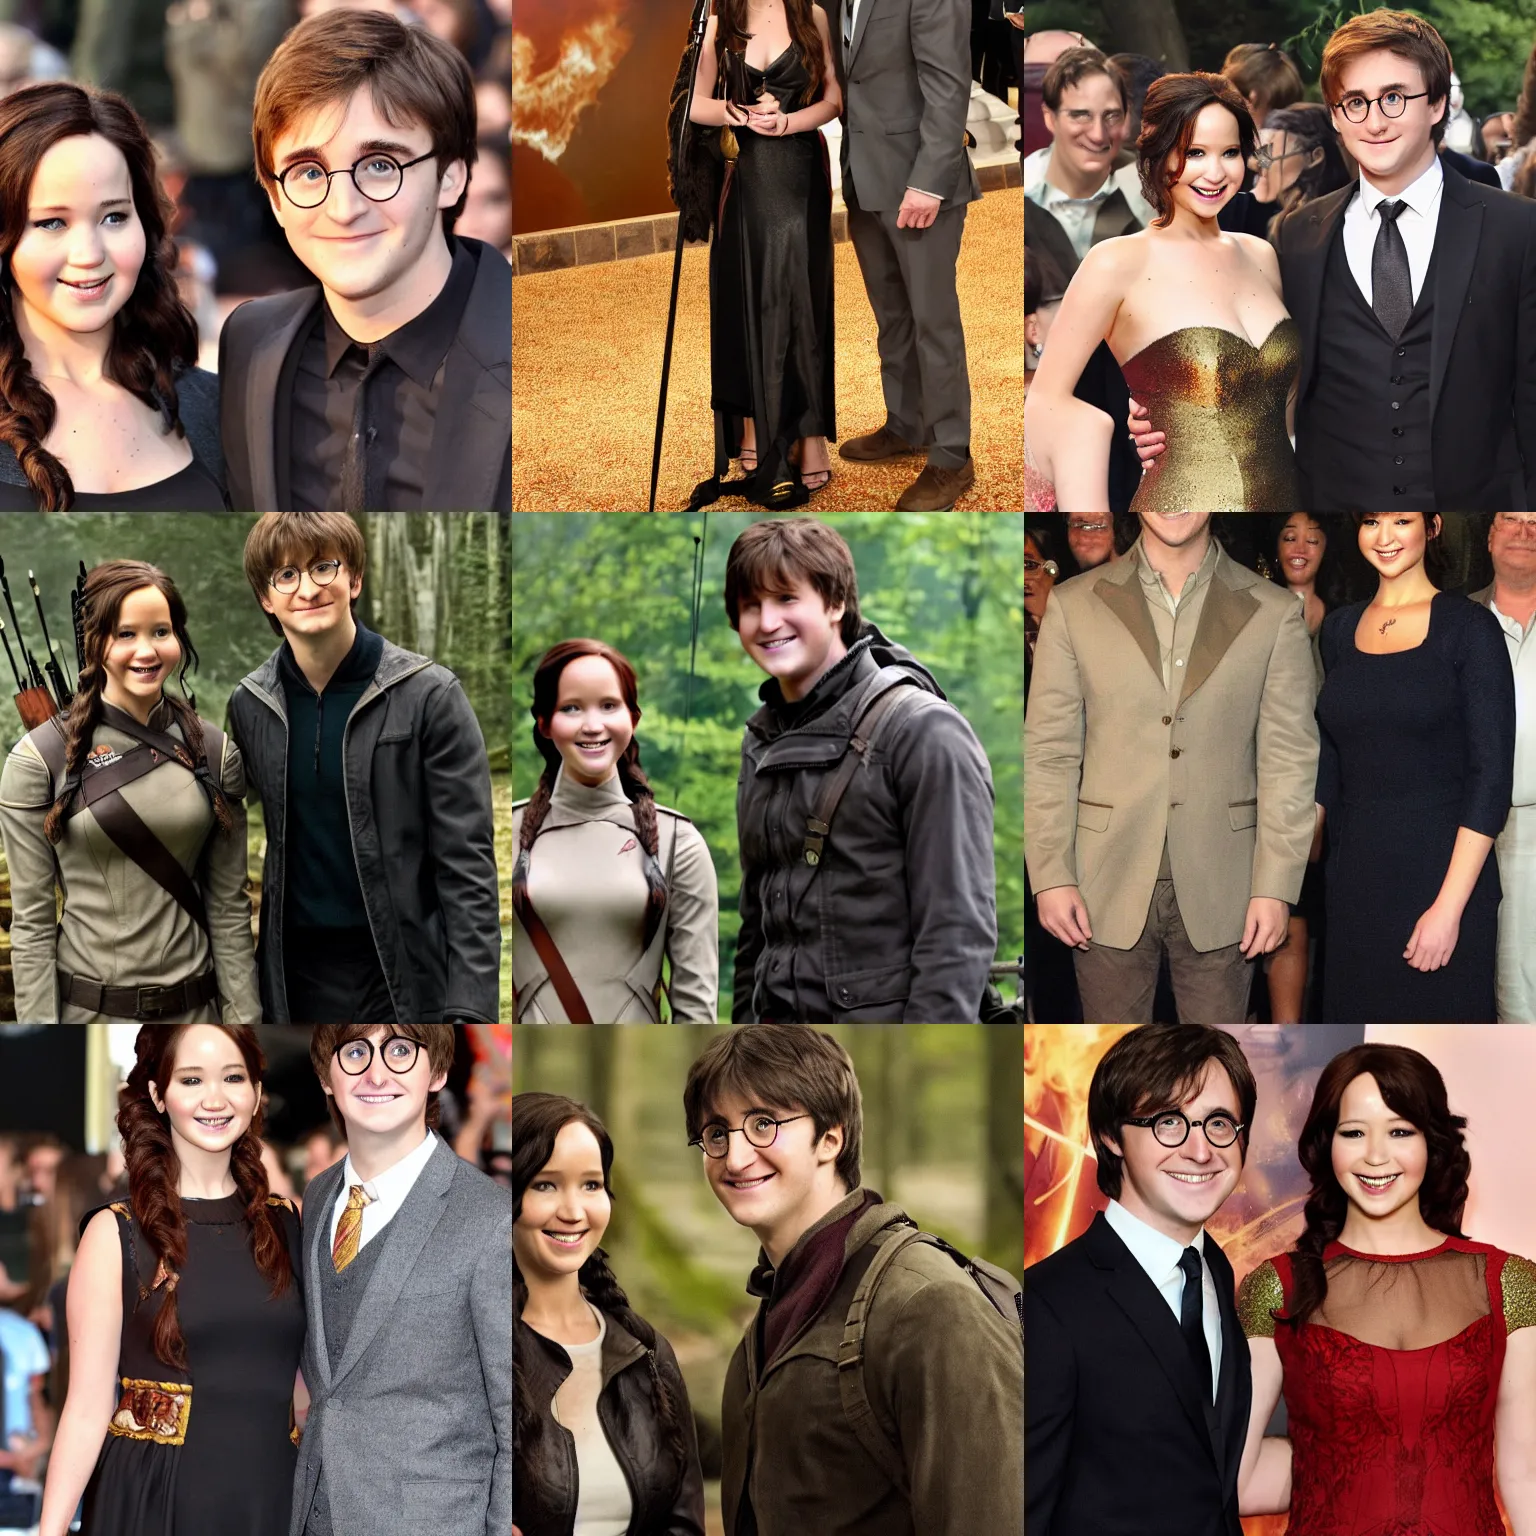 Prompt: Katniss Everdeen standing next to Harry Potter, both smiling for the camera